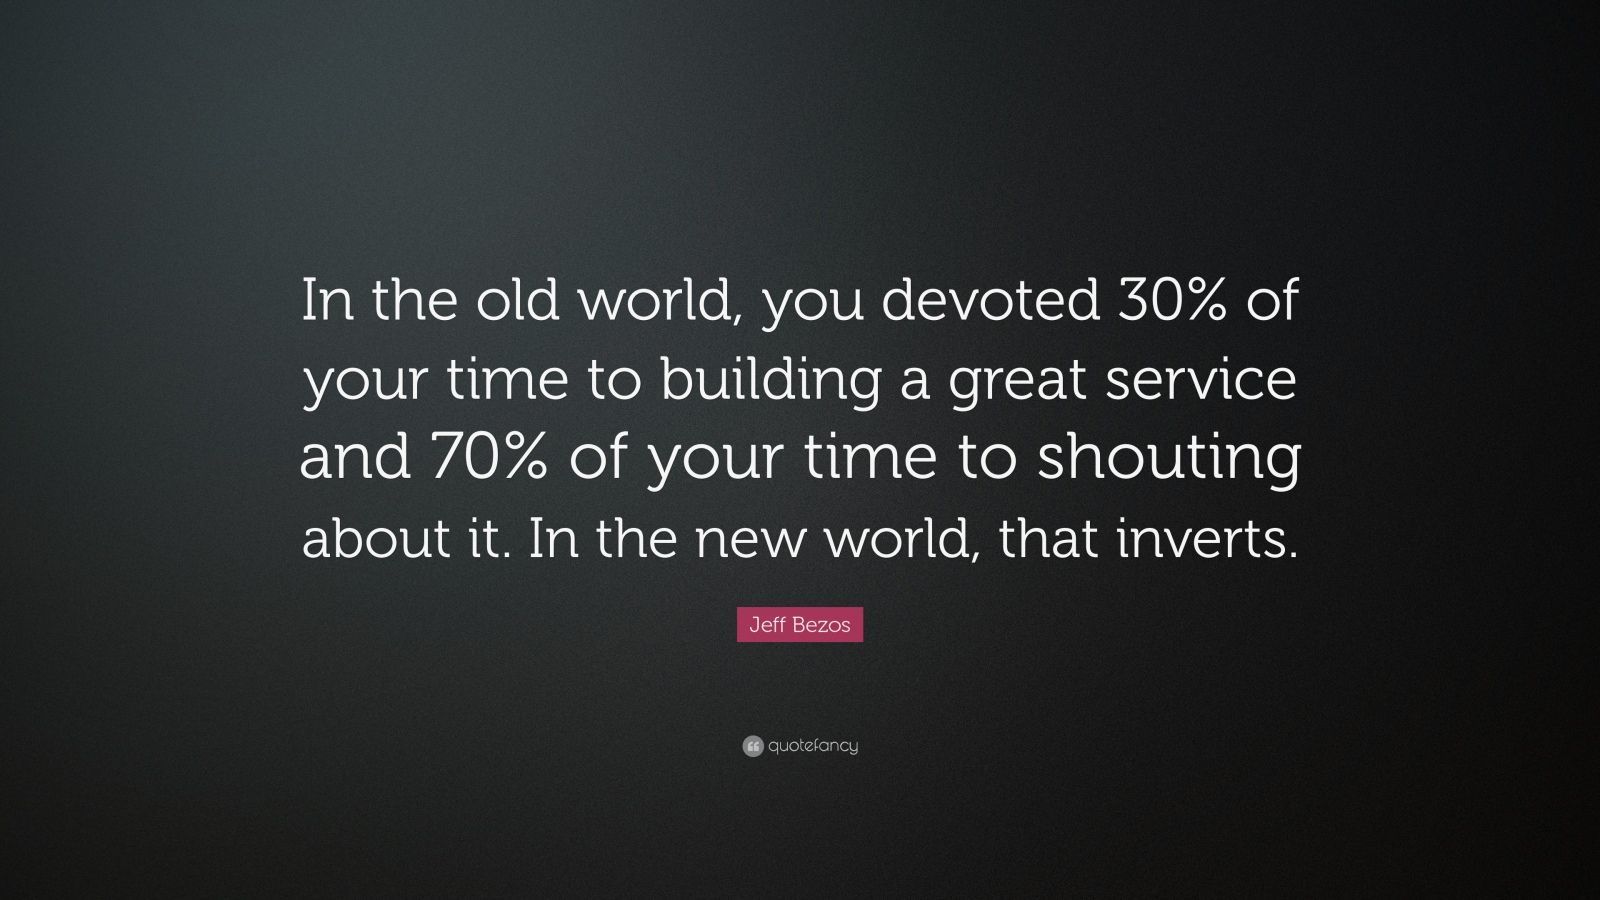 Jeff Bezos Quote: “In the old world, you devoted 30% of your time to building a great service and 70% of your time to shouting about it. In.” (19 wallpaper)